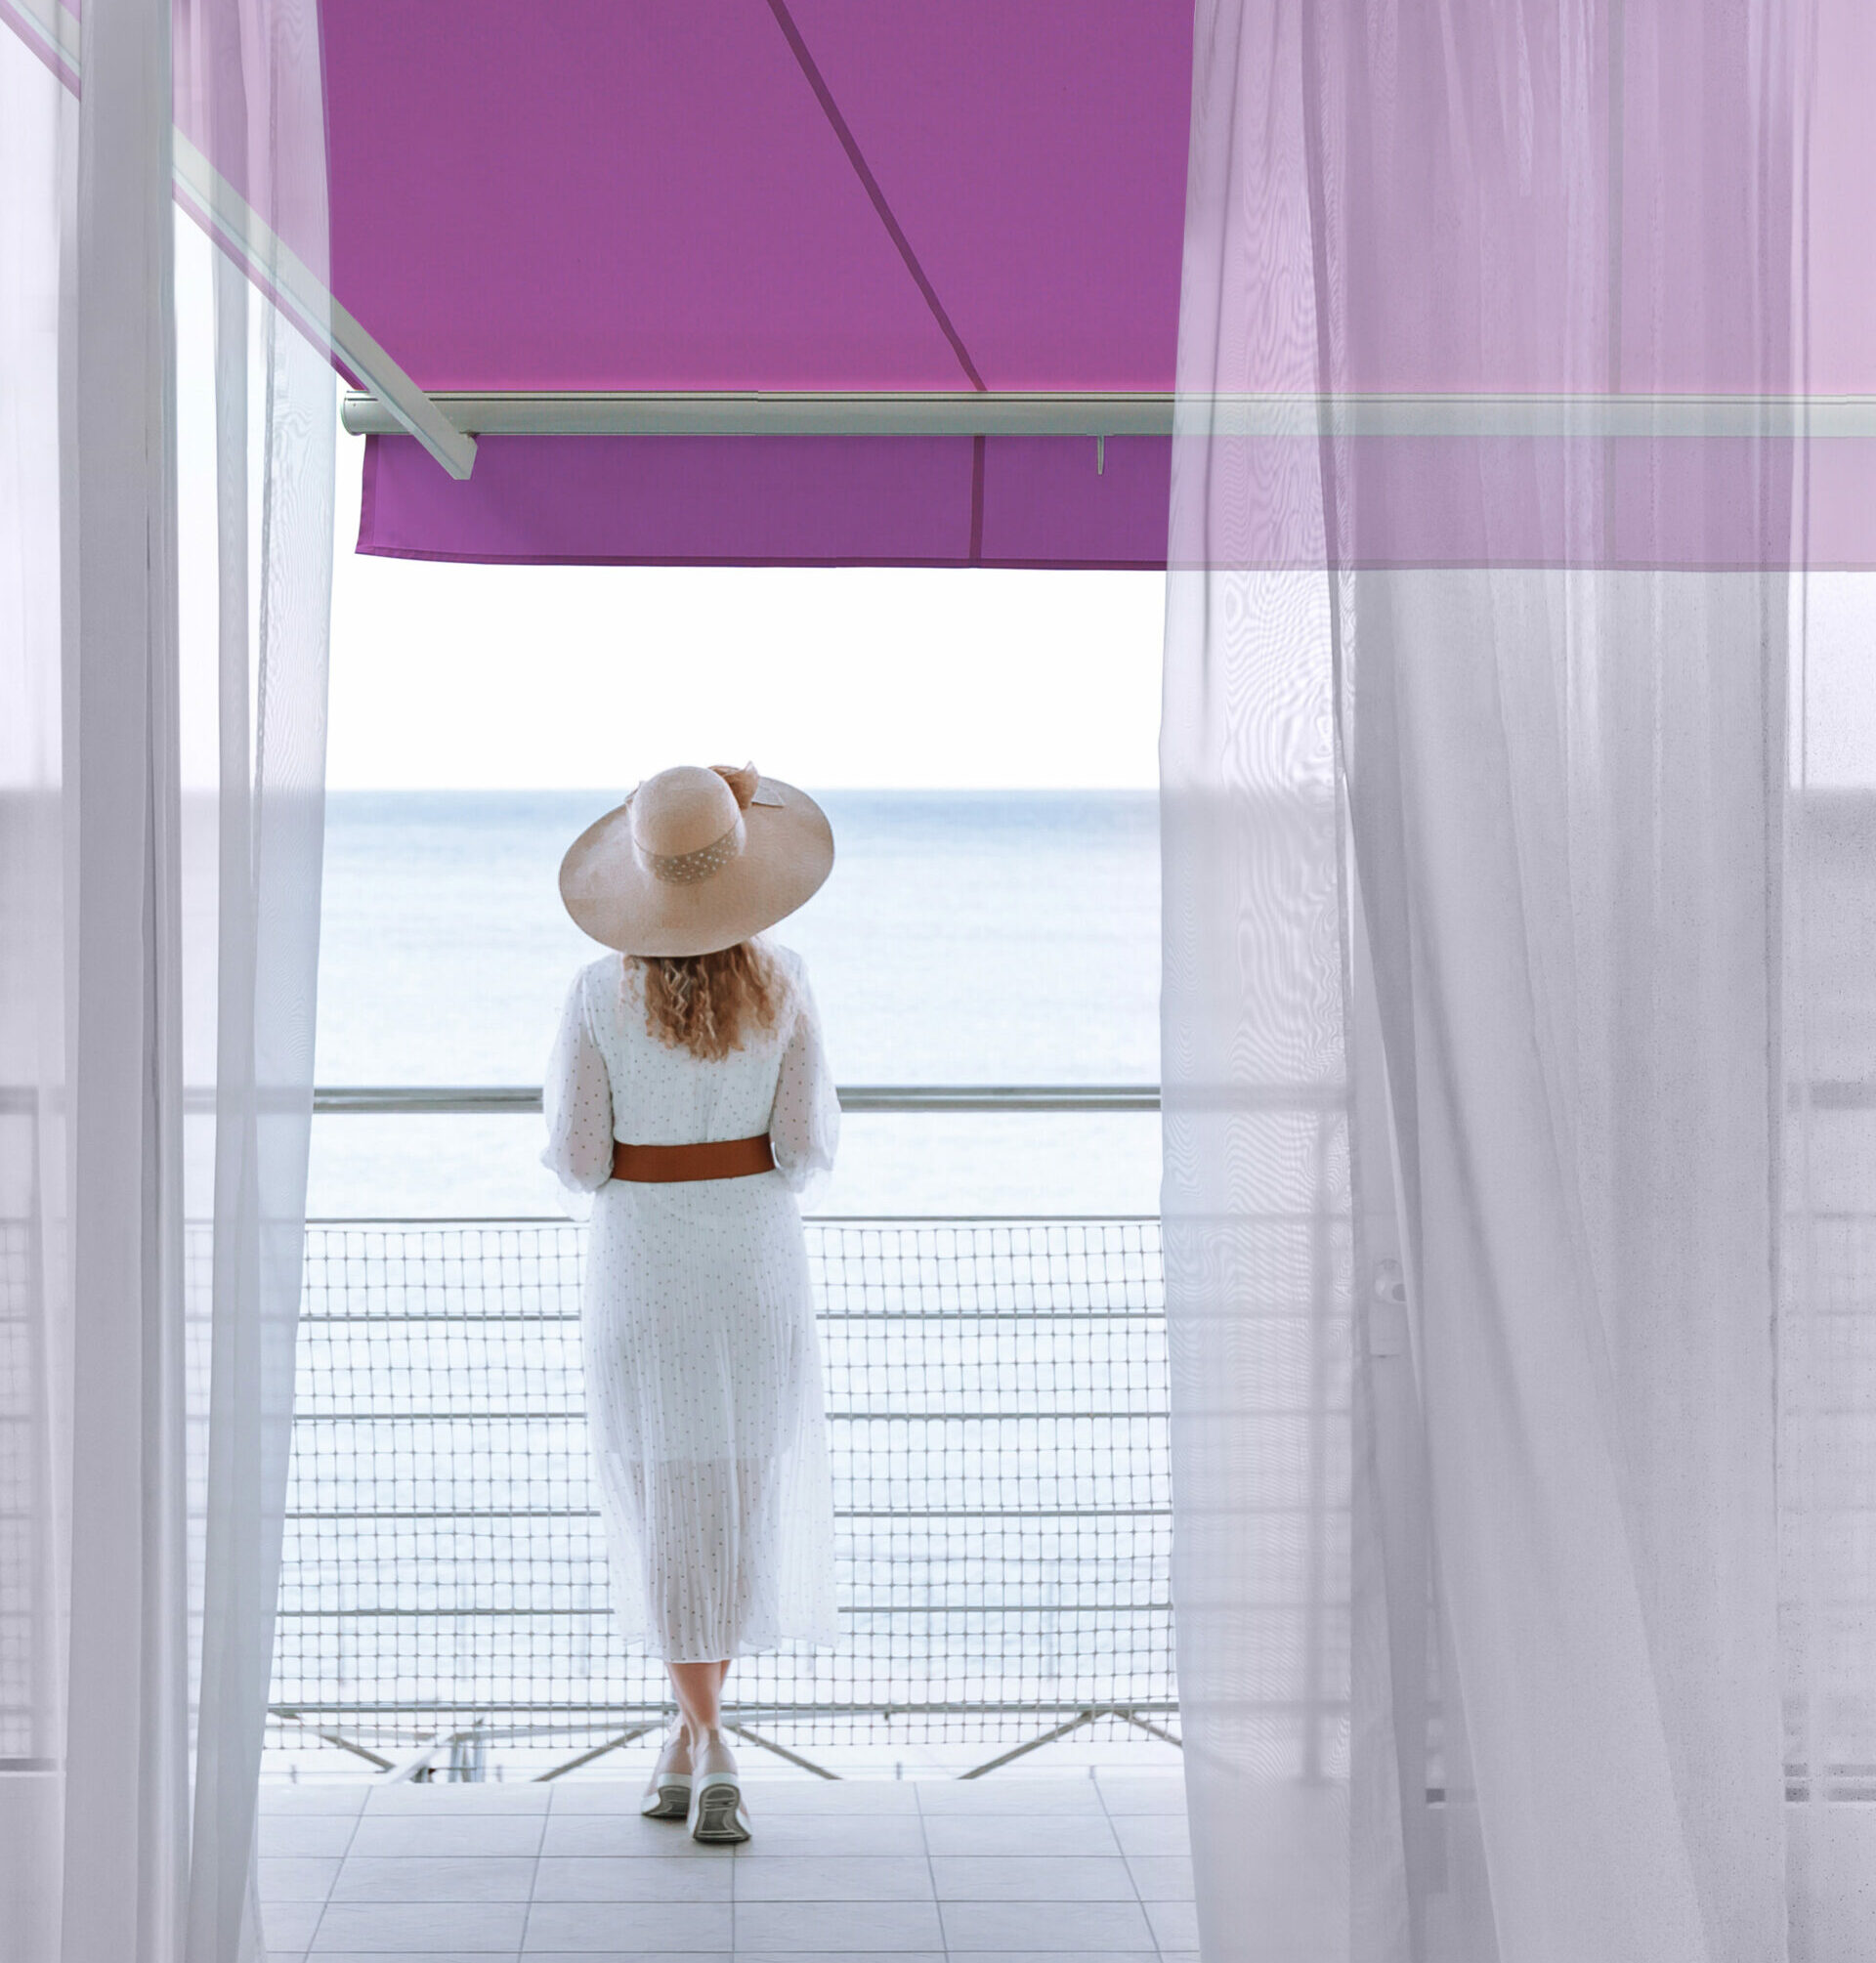 A woman stands under a stunning purple window awning.